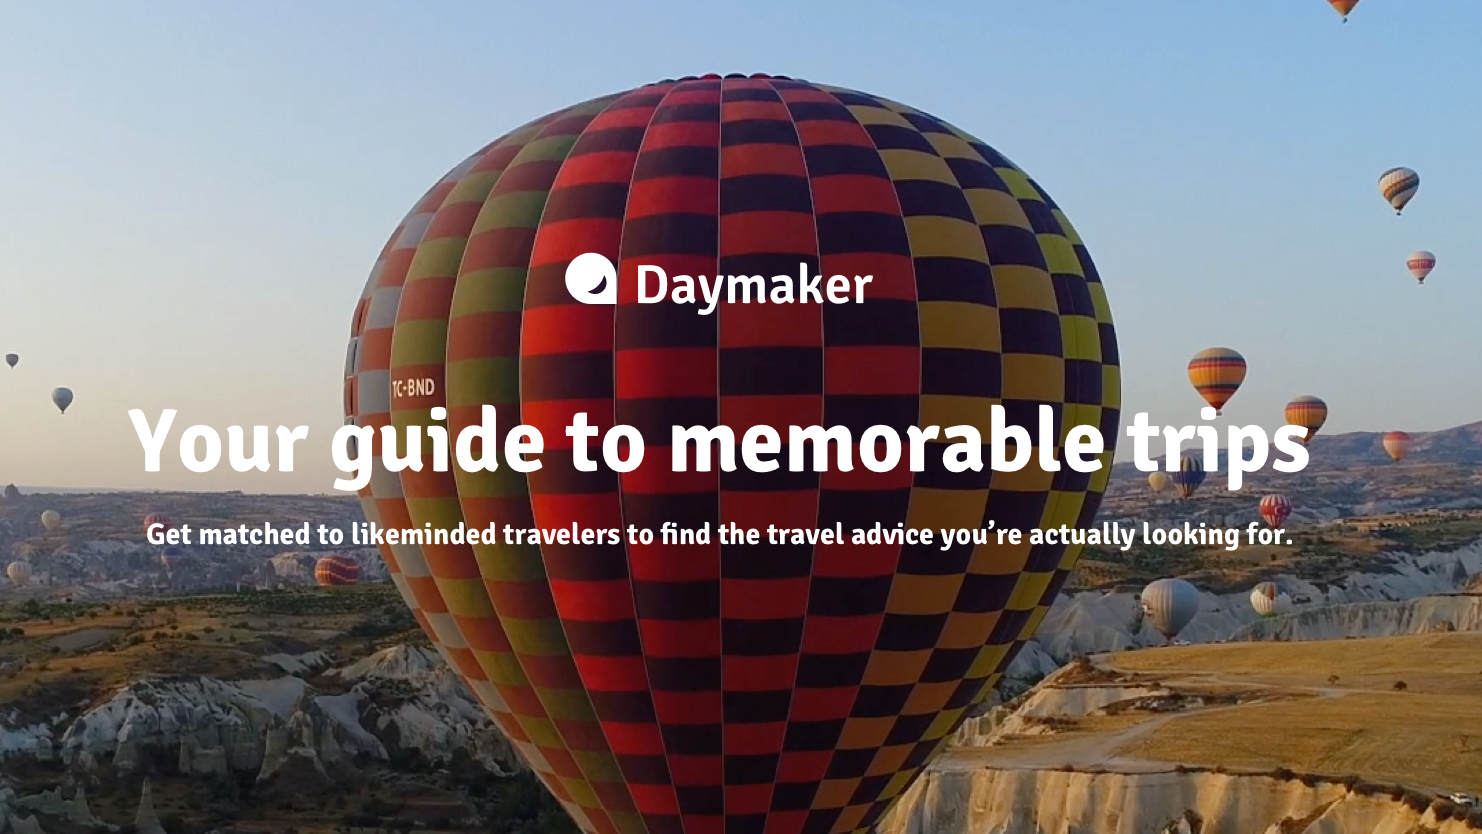 Daymaker - Your guide to memorable trips